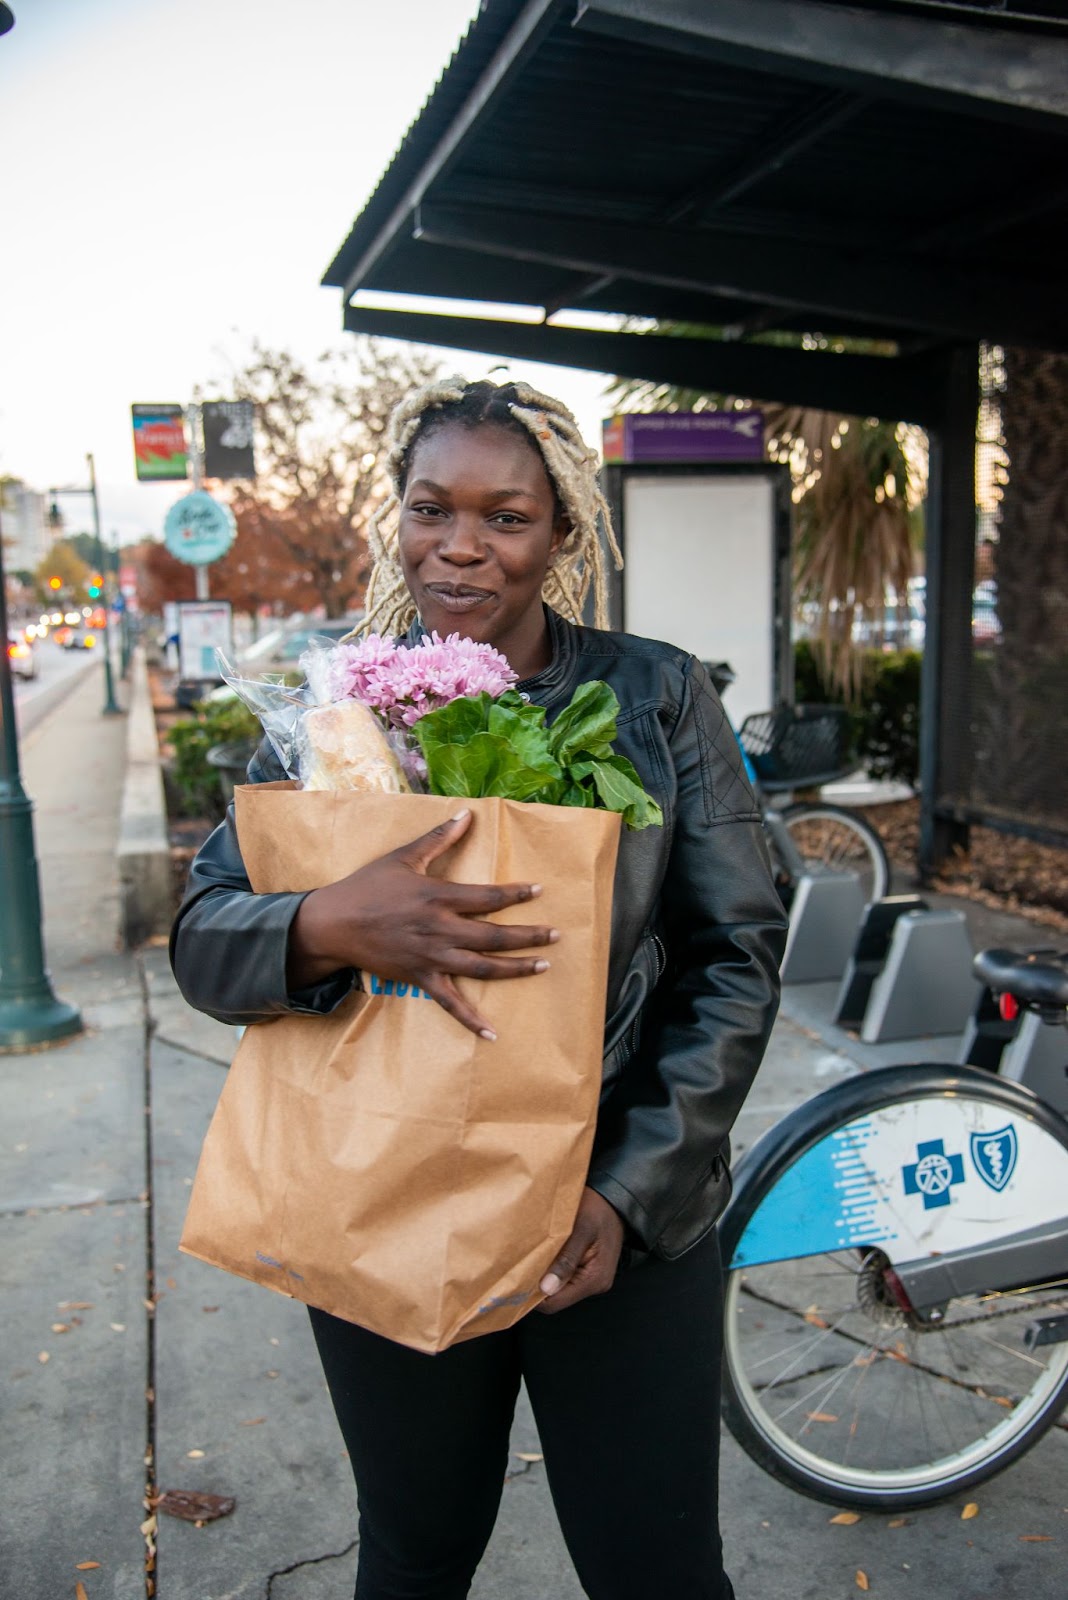 [A woman holding a bag of groceries that has bread and fresh flowers inside. The woman is standing near a COMET bus stop and Blue Bike SC location. The woman is black with blond braided hair and a leather jacket. She is smiling gently at the camera. ]